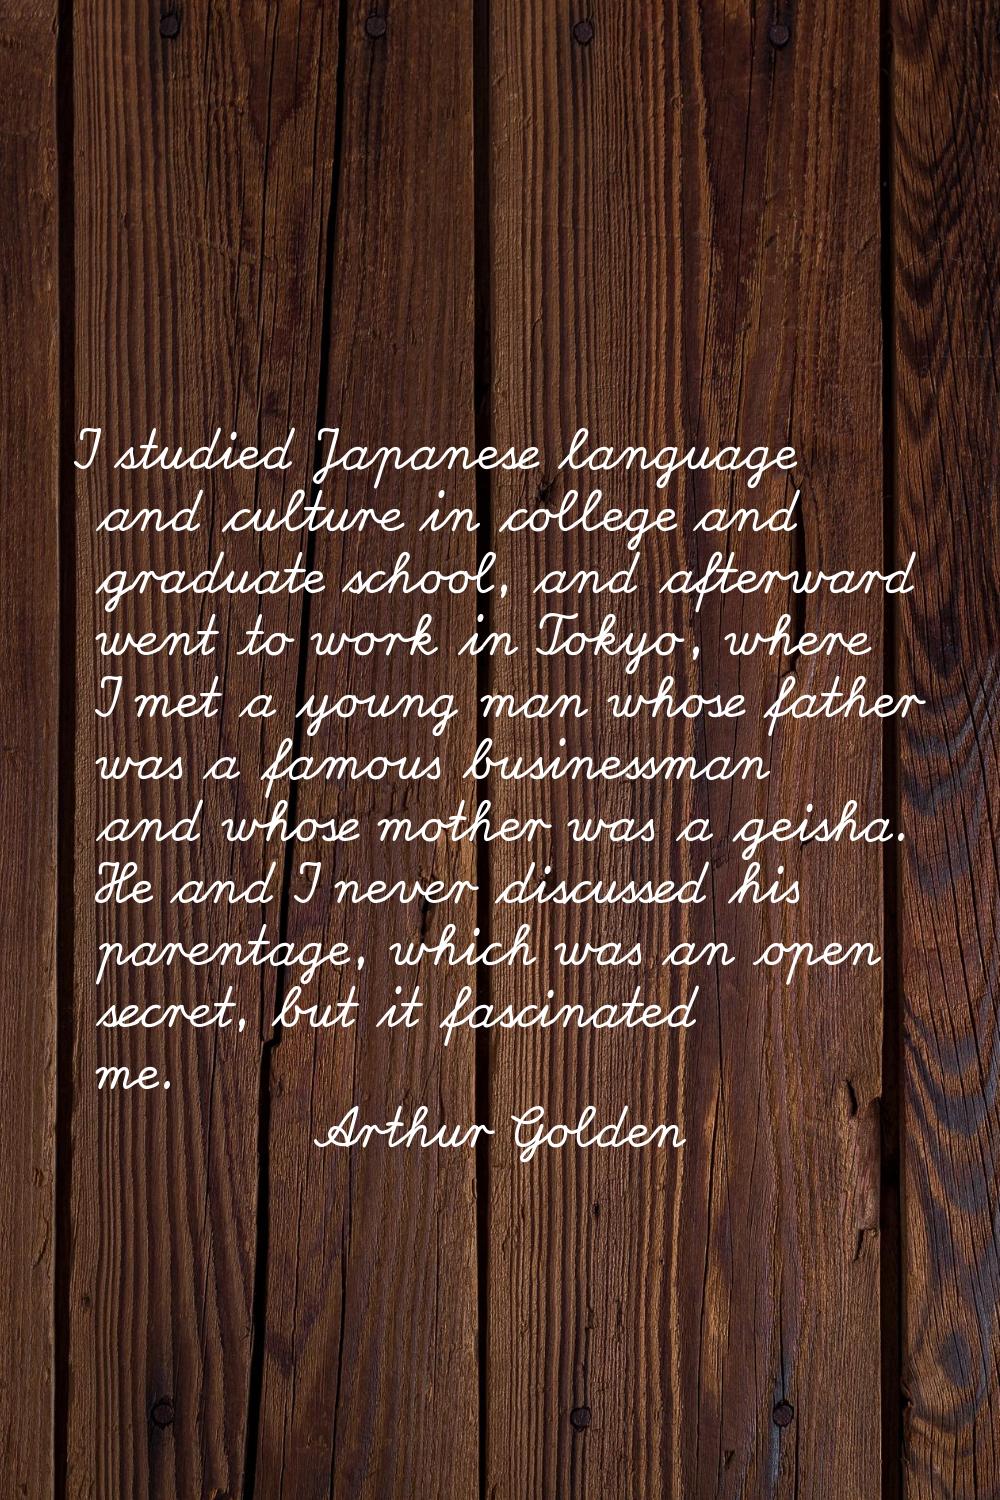 I studied Japanese language and culture in college and graduate school, and afterward went to work 